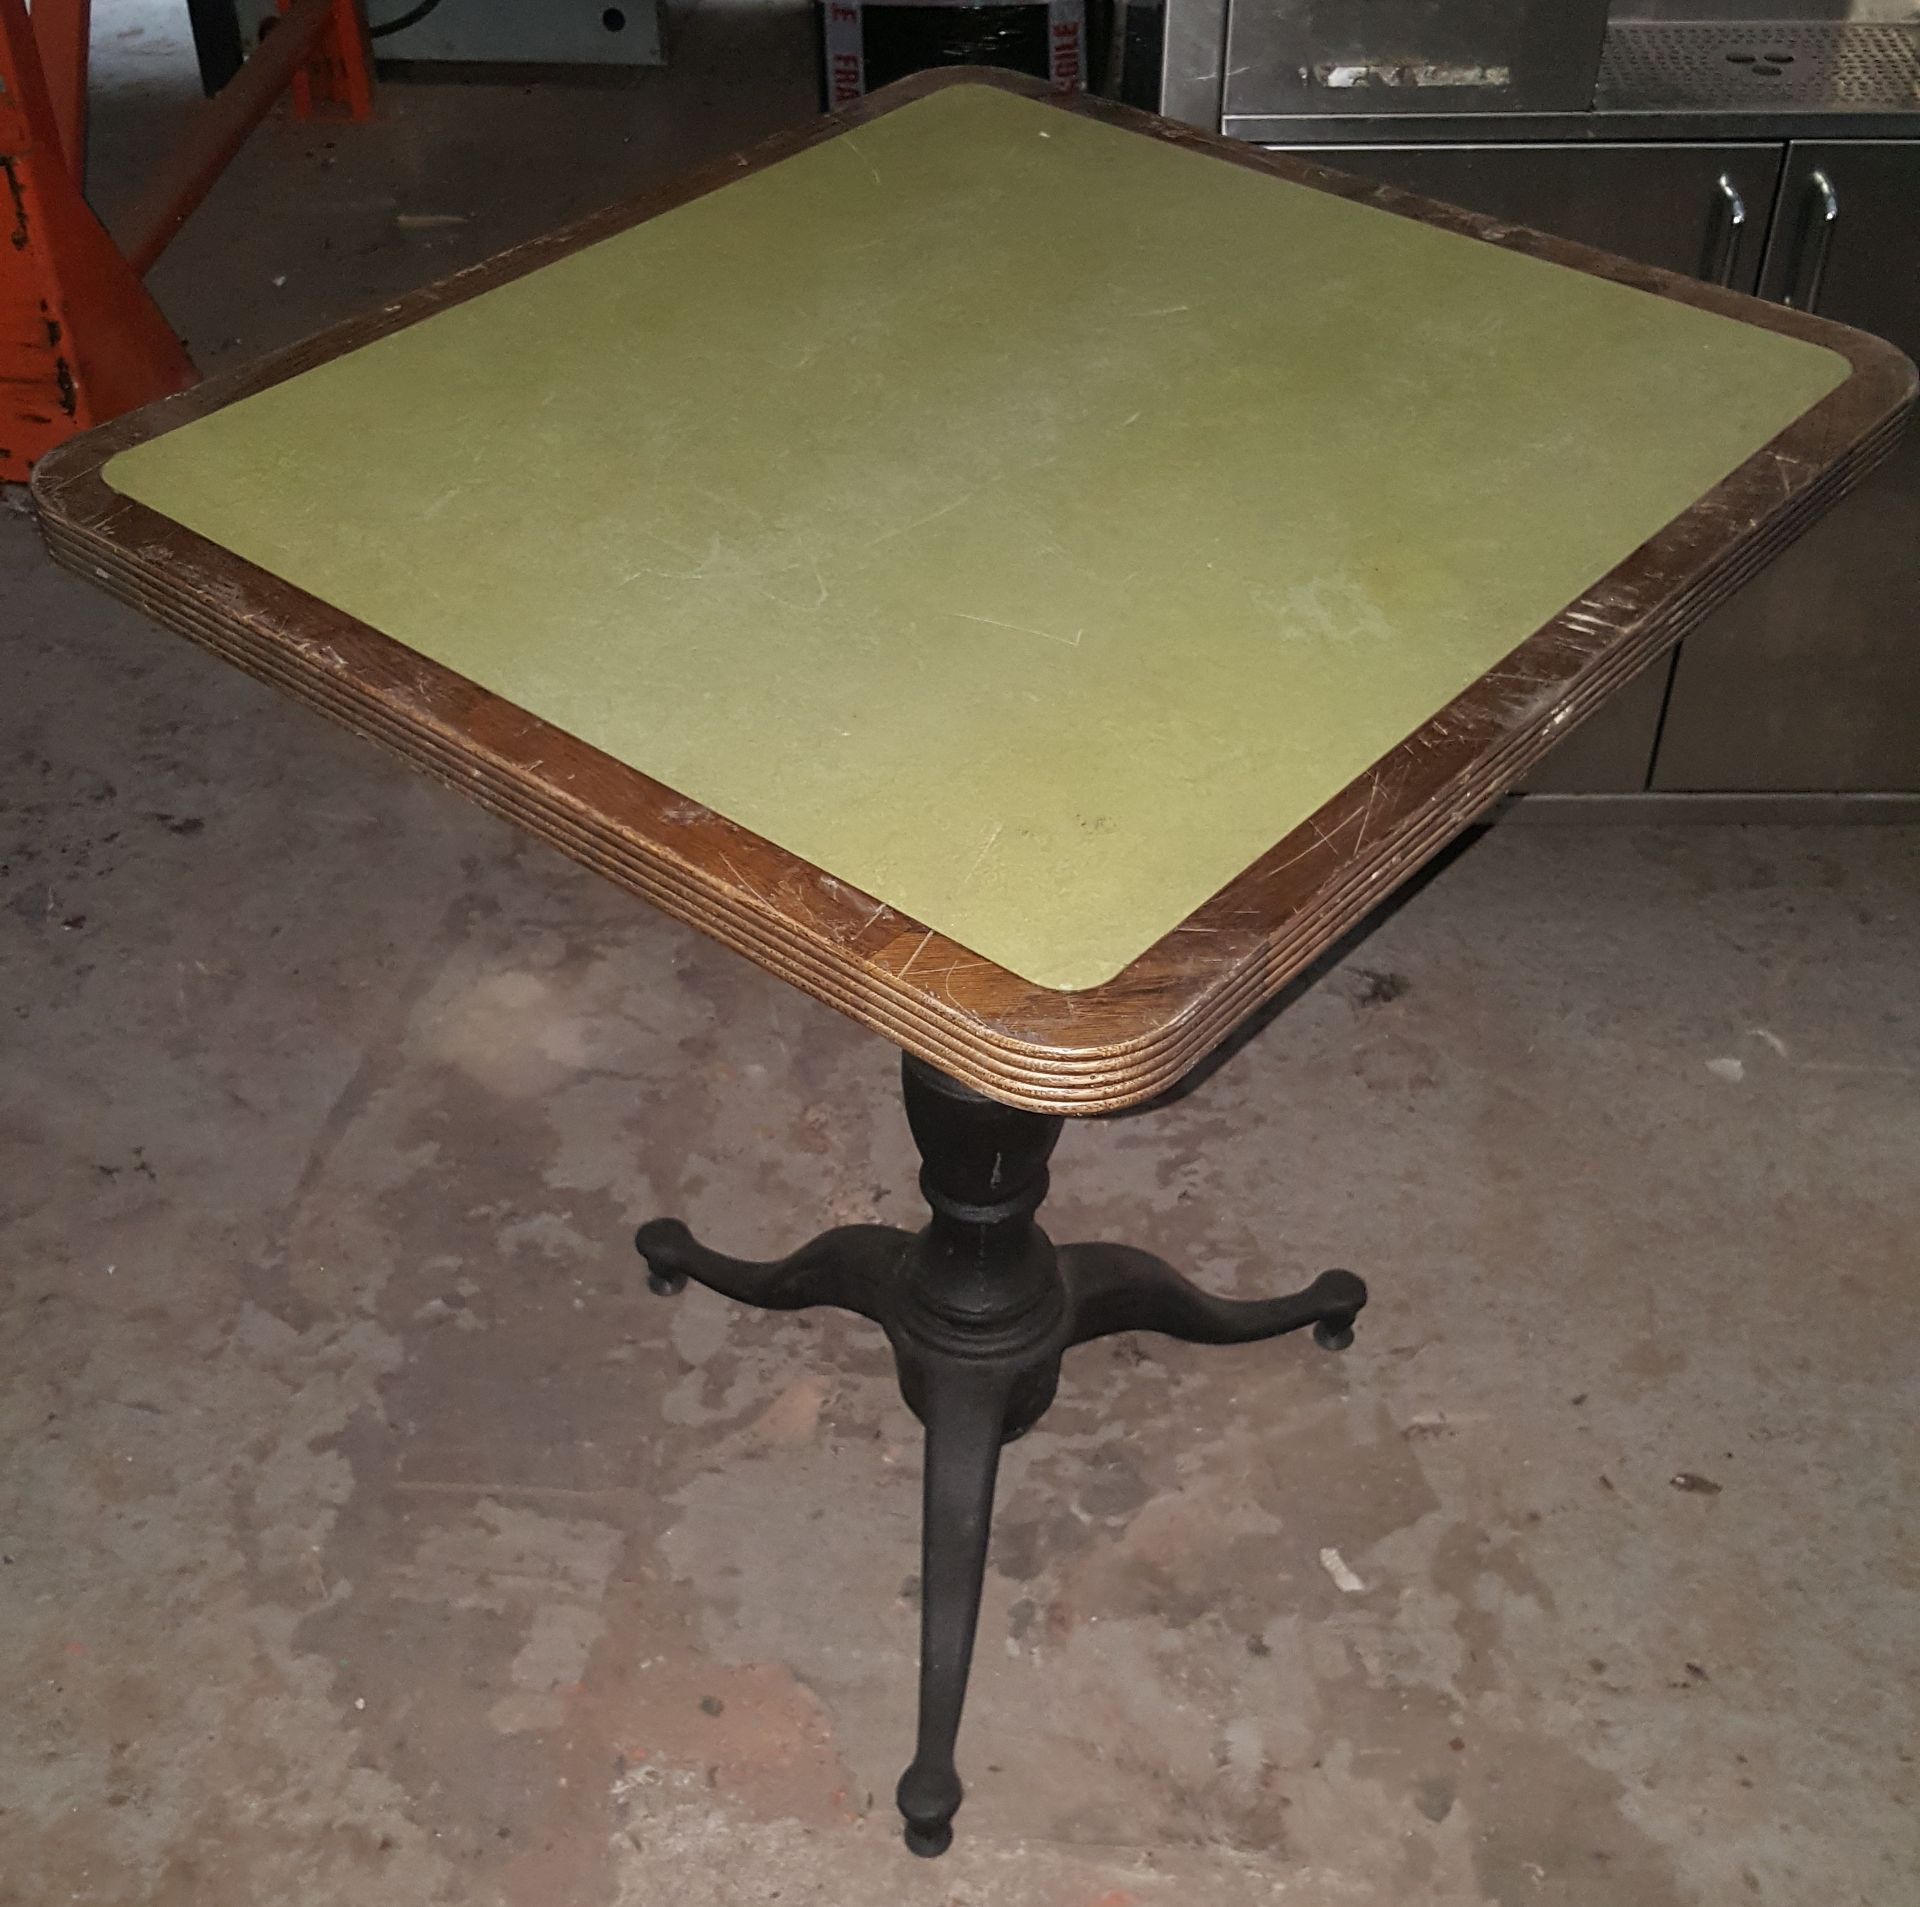 3 x Assorted Bistro Restaurant Tables With Green Faux Leather Inserts And Three-Legged Base - Image 6 of 9